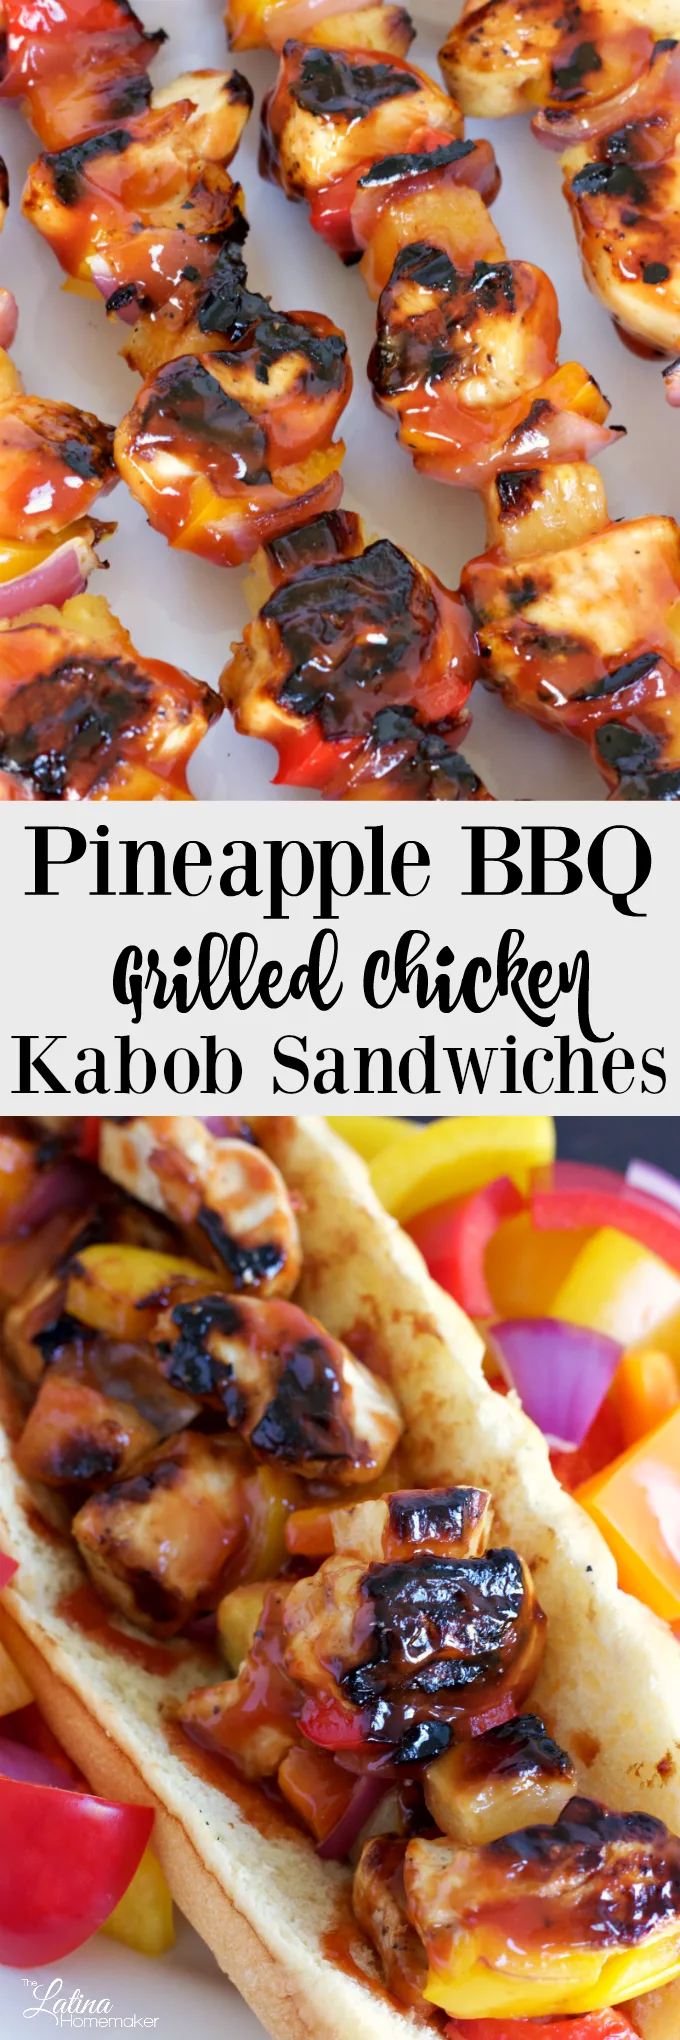 Pineapple BBQ Grilled Chicken Kabob Sandwiches – These deliciously grilled chicken kabobs are slathered with a savory pineapple BBQ sauce and served on a toasted hoagie roll. It's sure to be a hit!